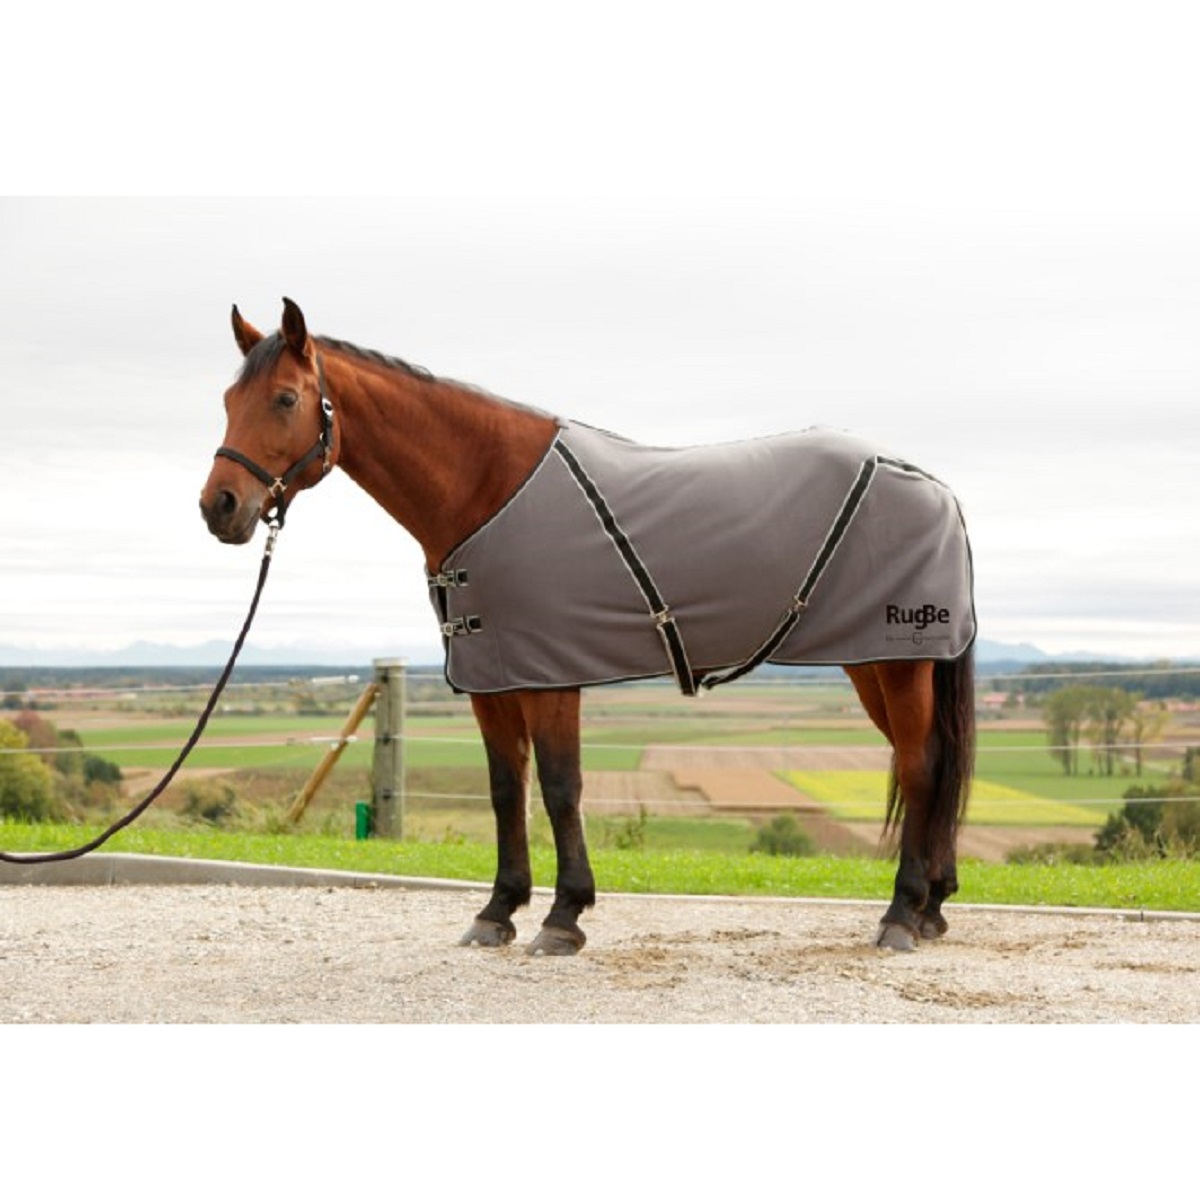 RugBe Classic Cooler Rug anthracite / black 145